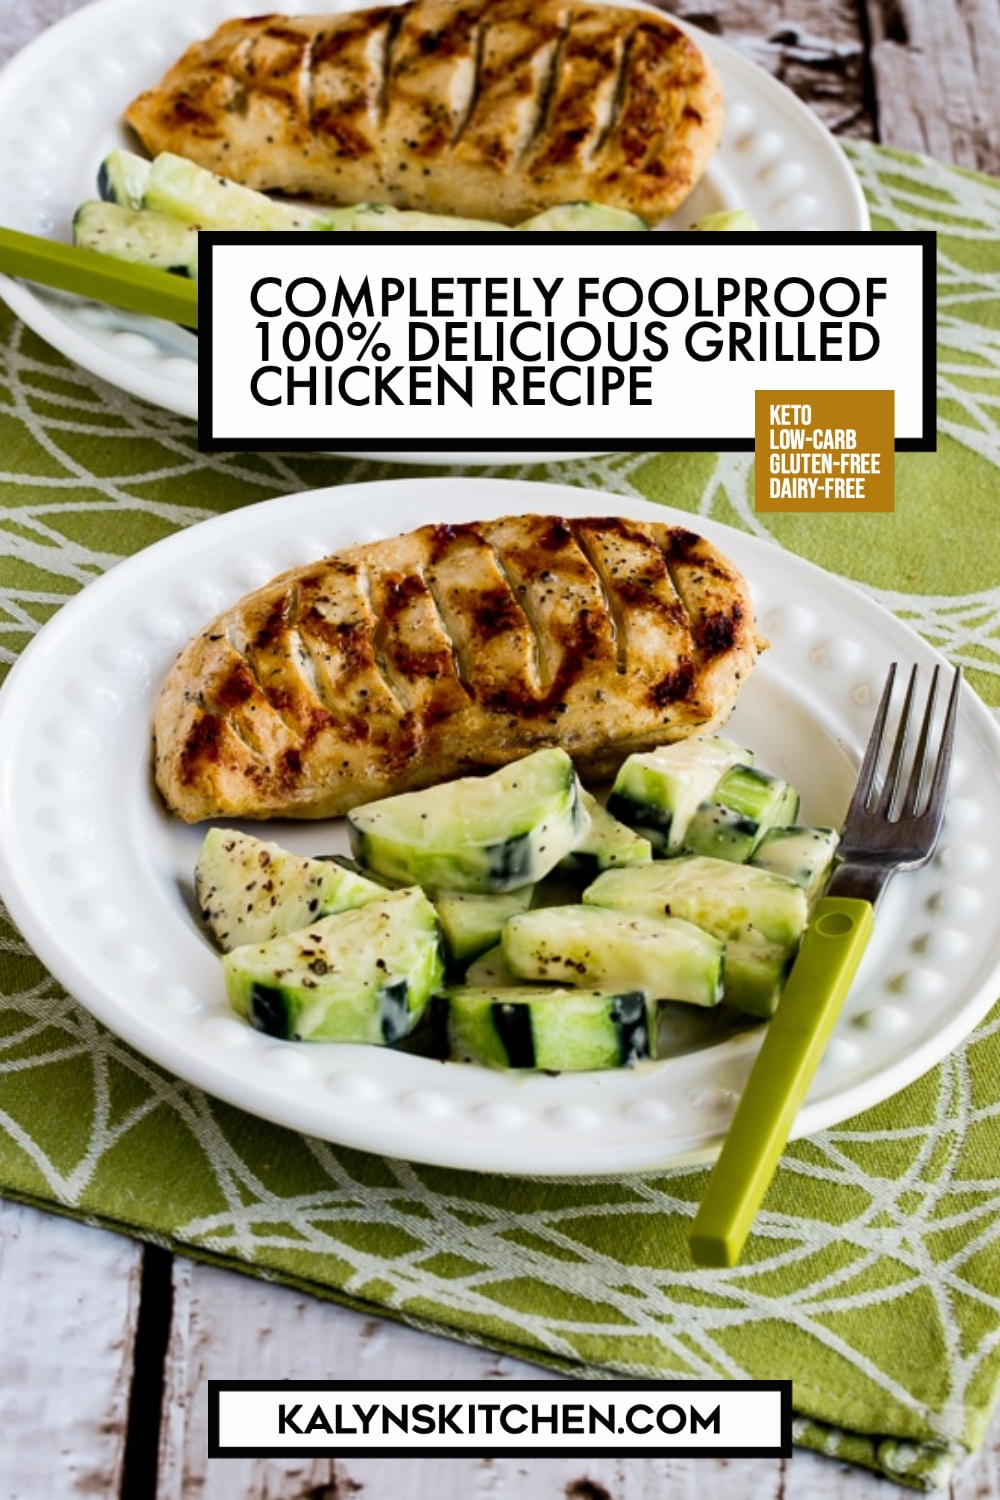 Pinterest image of Completely Foolproof 100% Delicious Grilled Chicken Recipe